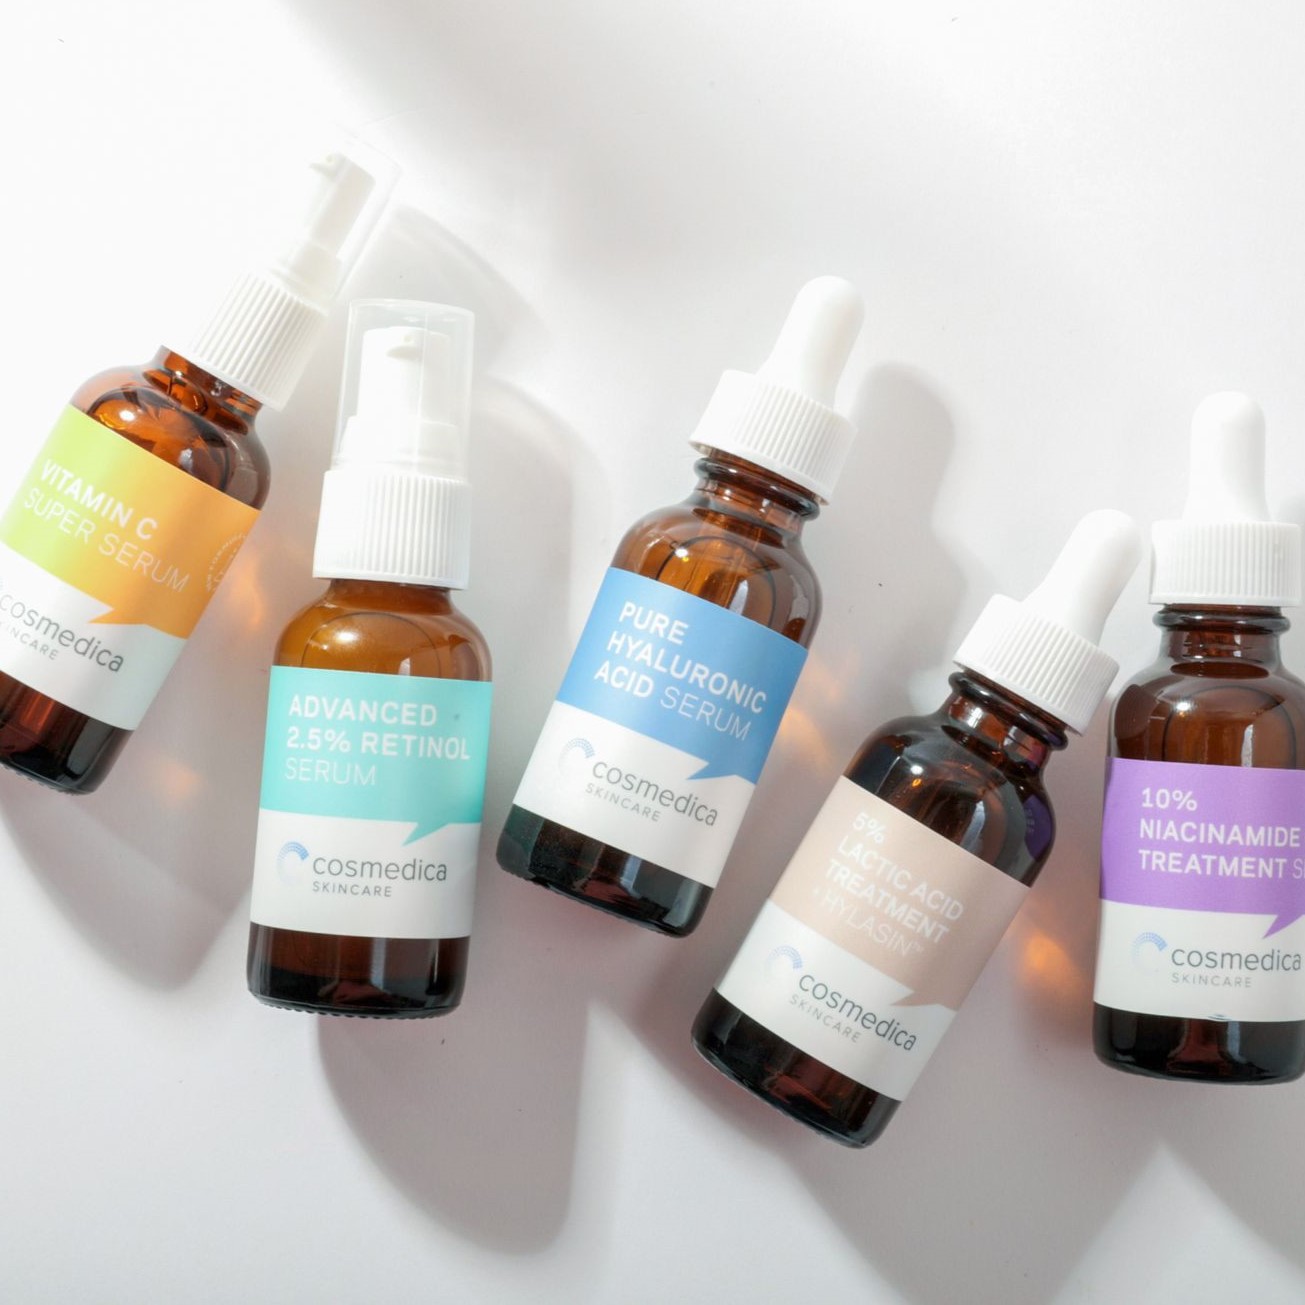 Cosmedica Skincare Pure Hyaluronic Acid Serums